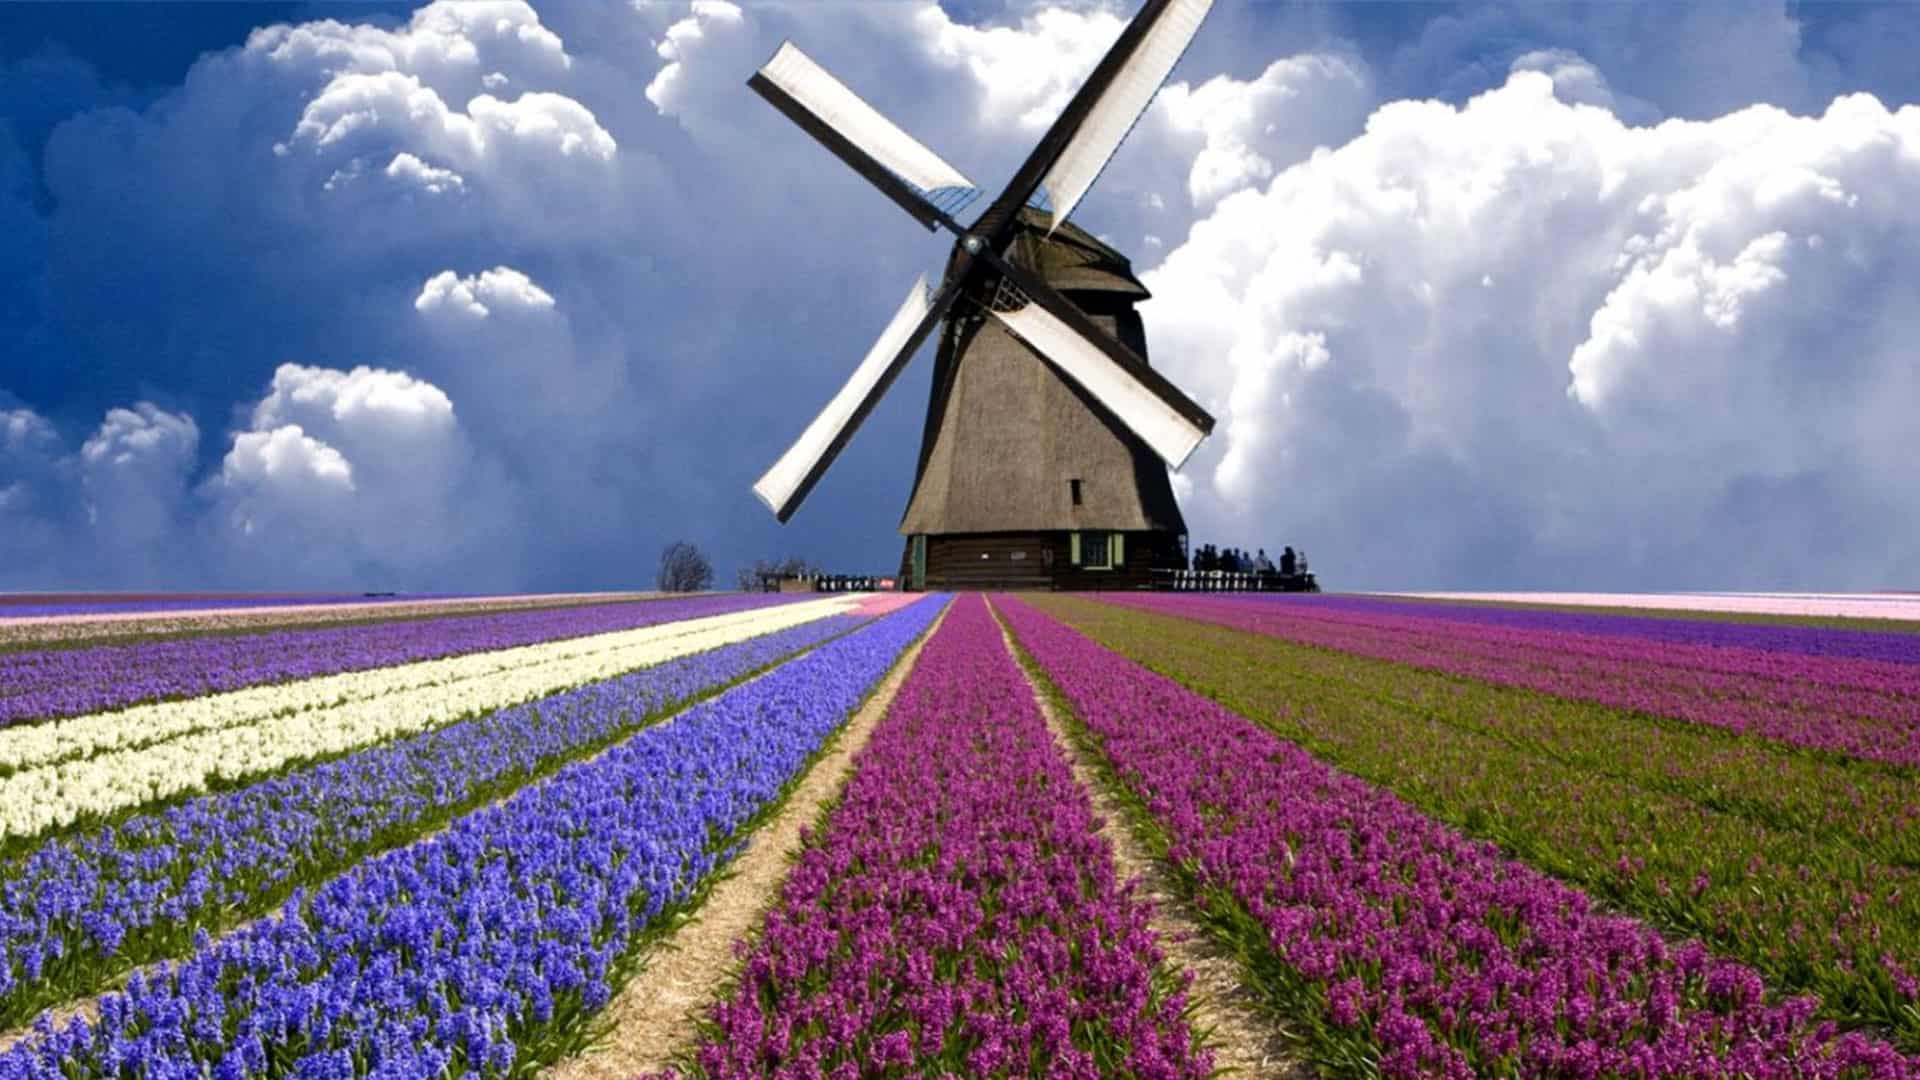 Huge Windmill Holland Tulip Fields Hd Wallpaper Hd Nature Wallpaper Luxe Voyager: Luxury Travel. Luxury Vacations & Holidays